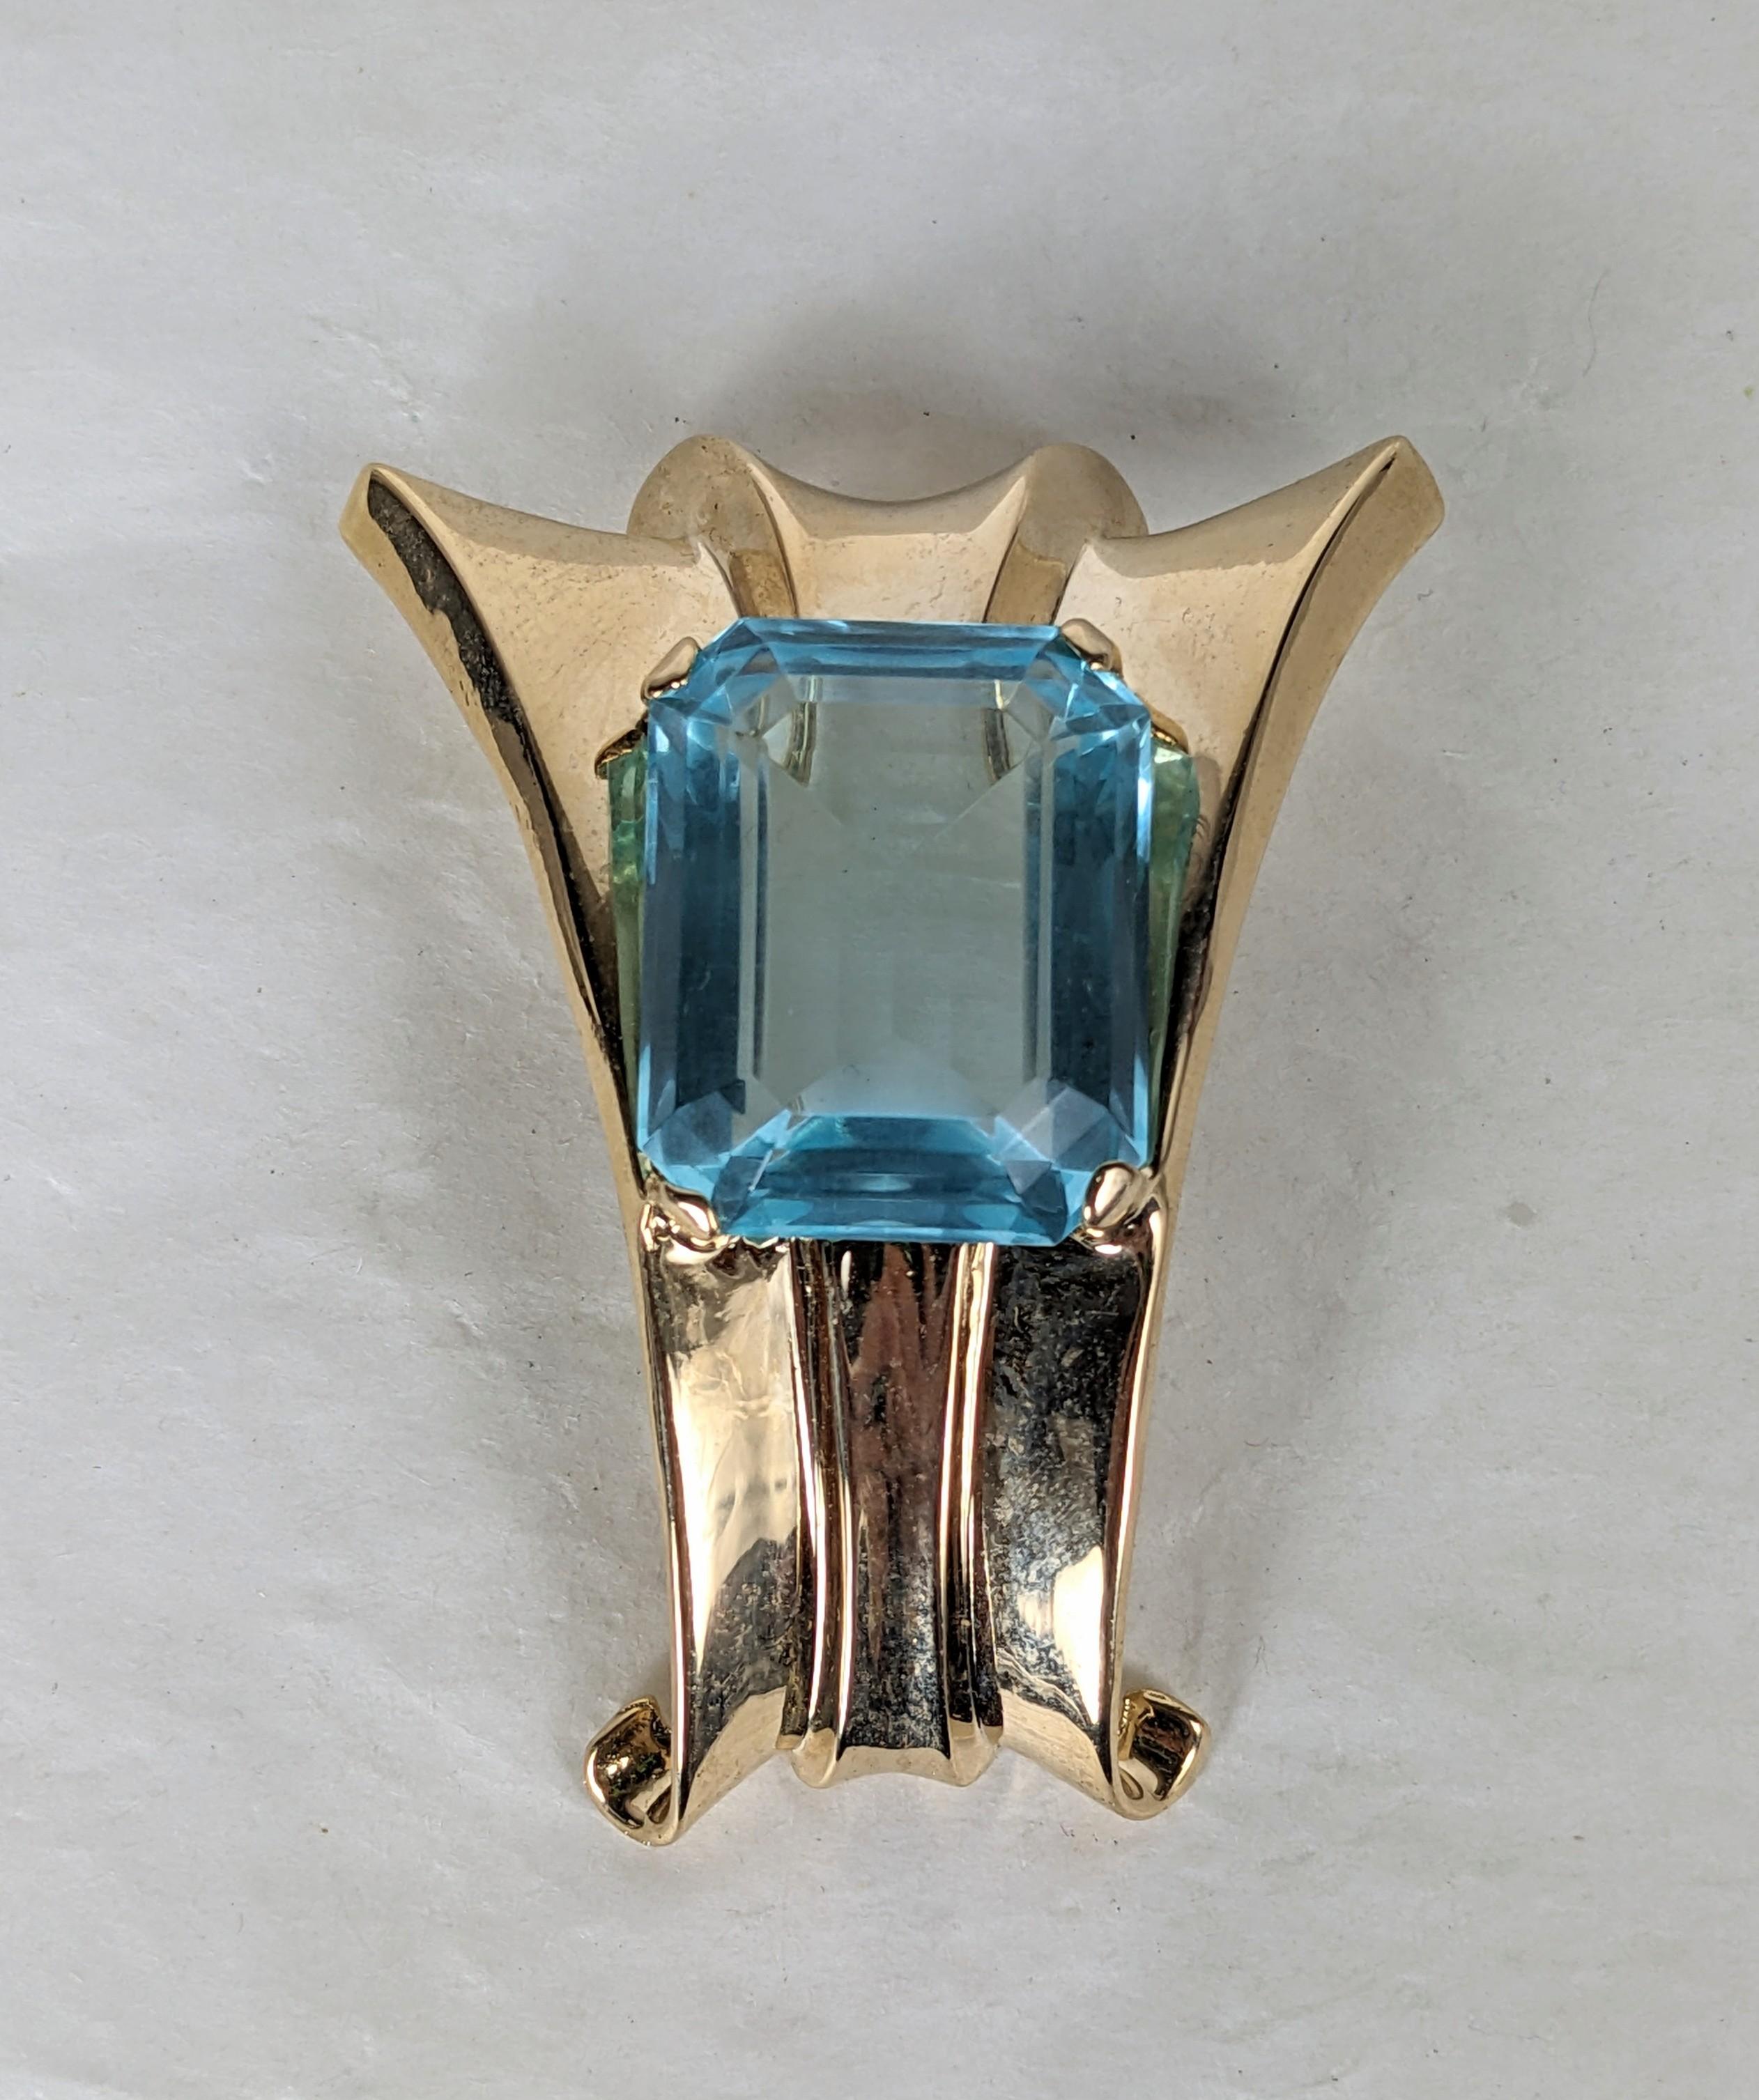 Alfred Philippe for Trifari faux aquamarine retro swirl clip brooch. Composed of yellow gold plated sterling silver ribbed chevron, with large rectangular focal aquamarine. Excellent Condition. 
L 2.25